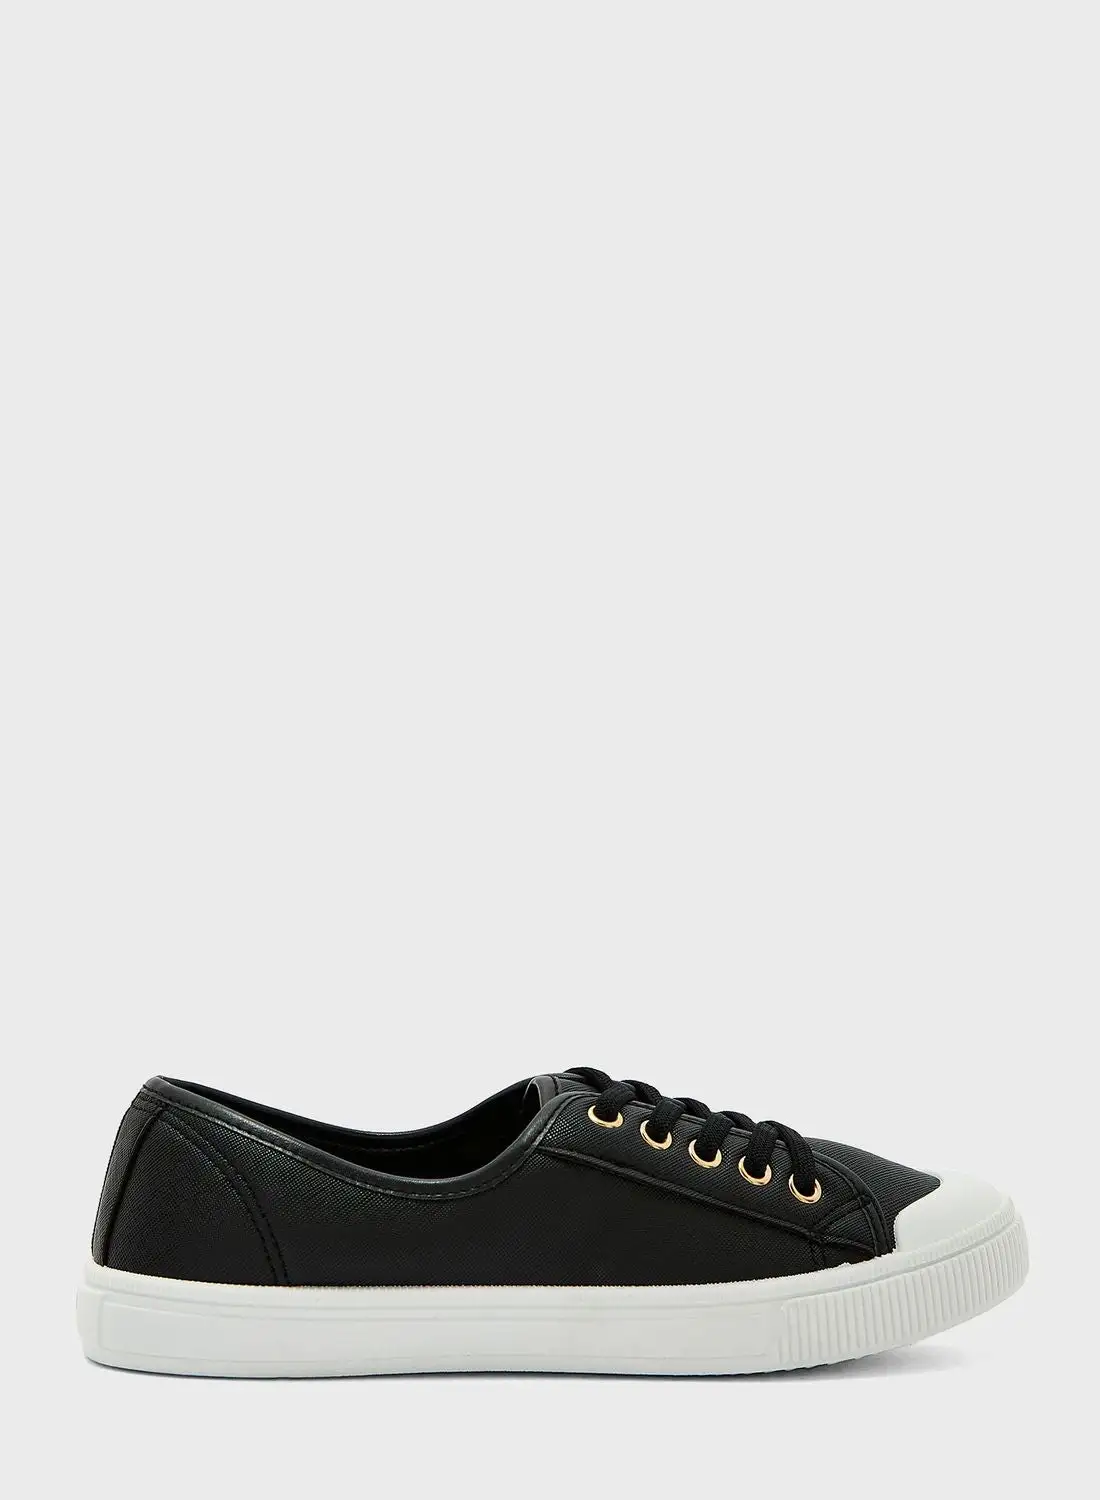 NEW LOOK Marsha Laceless Low Top Sneakers